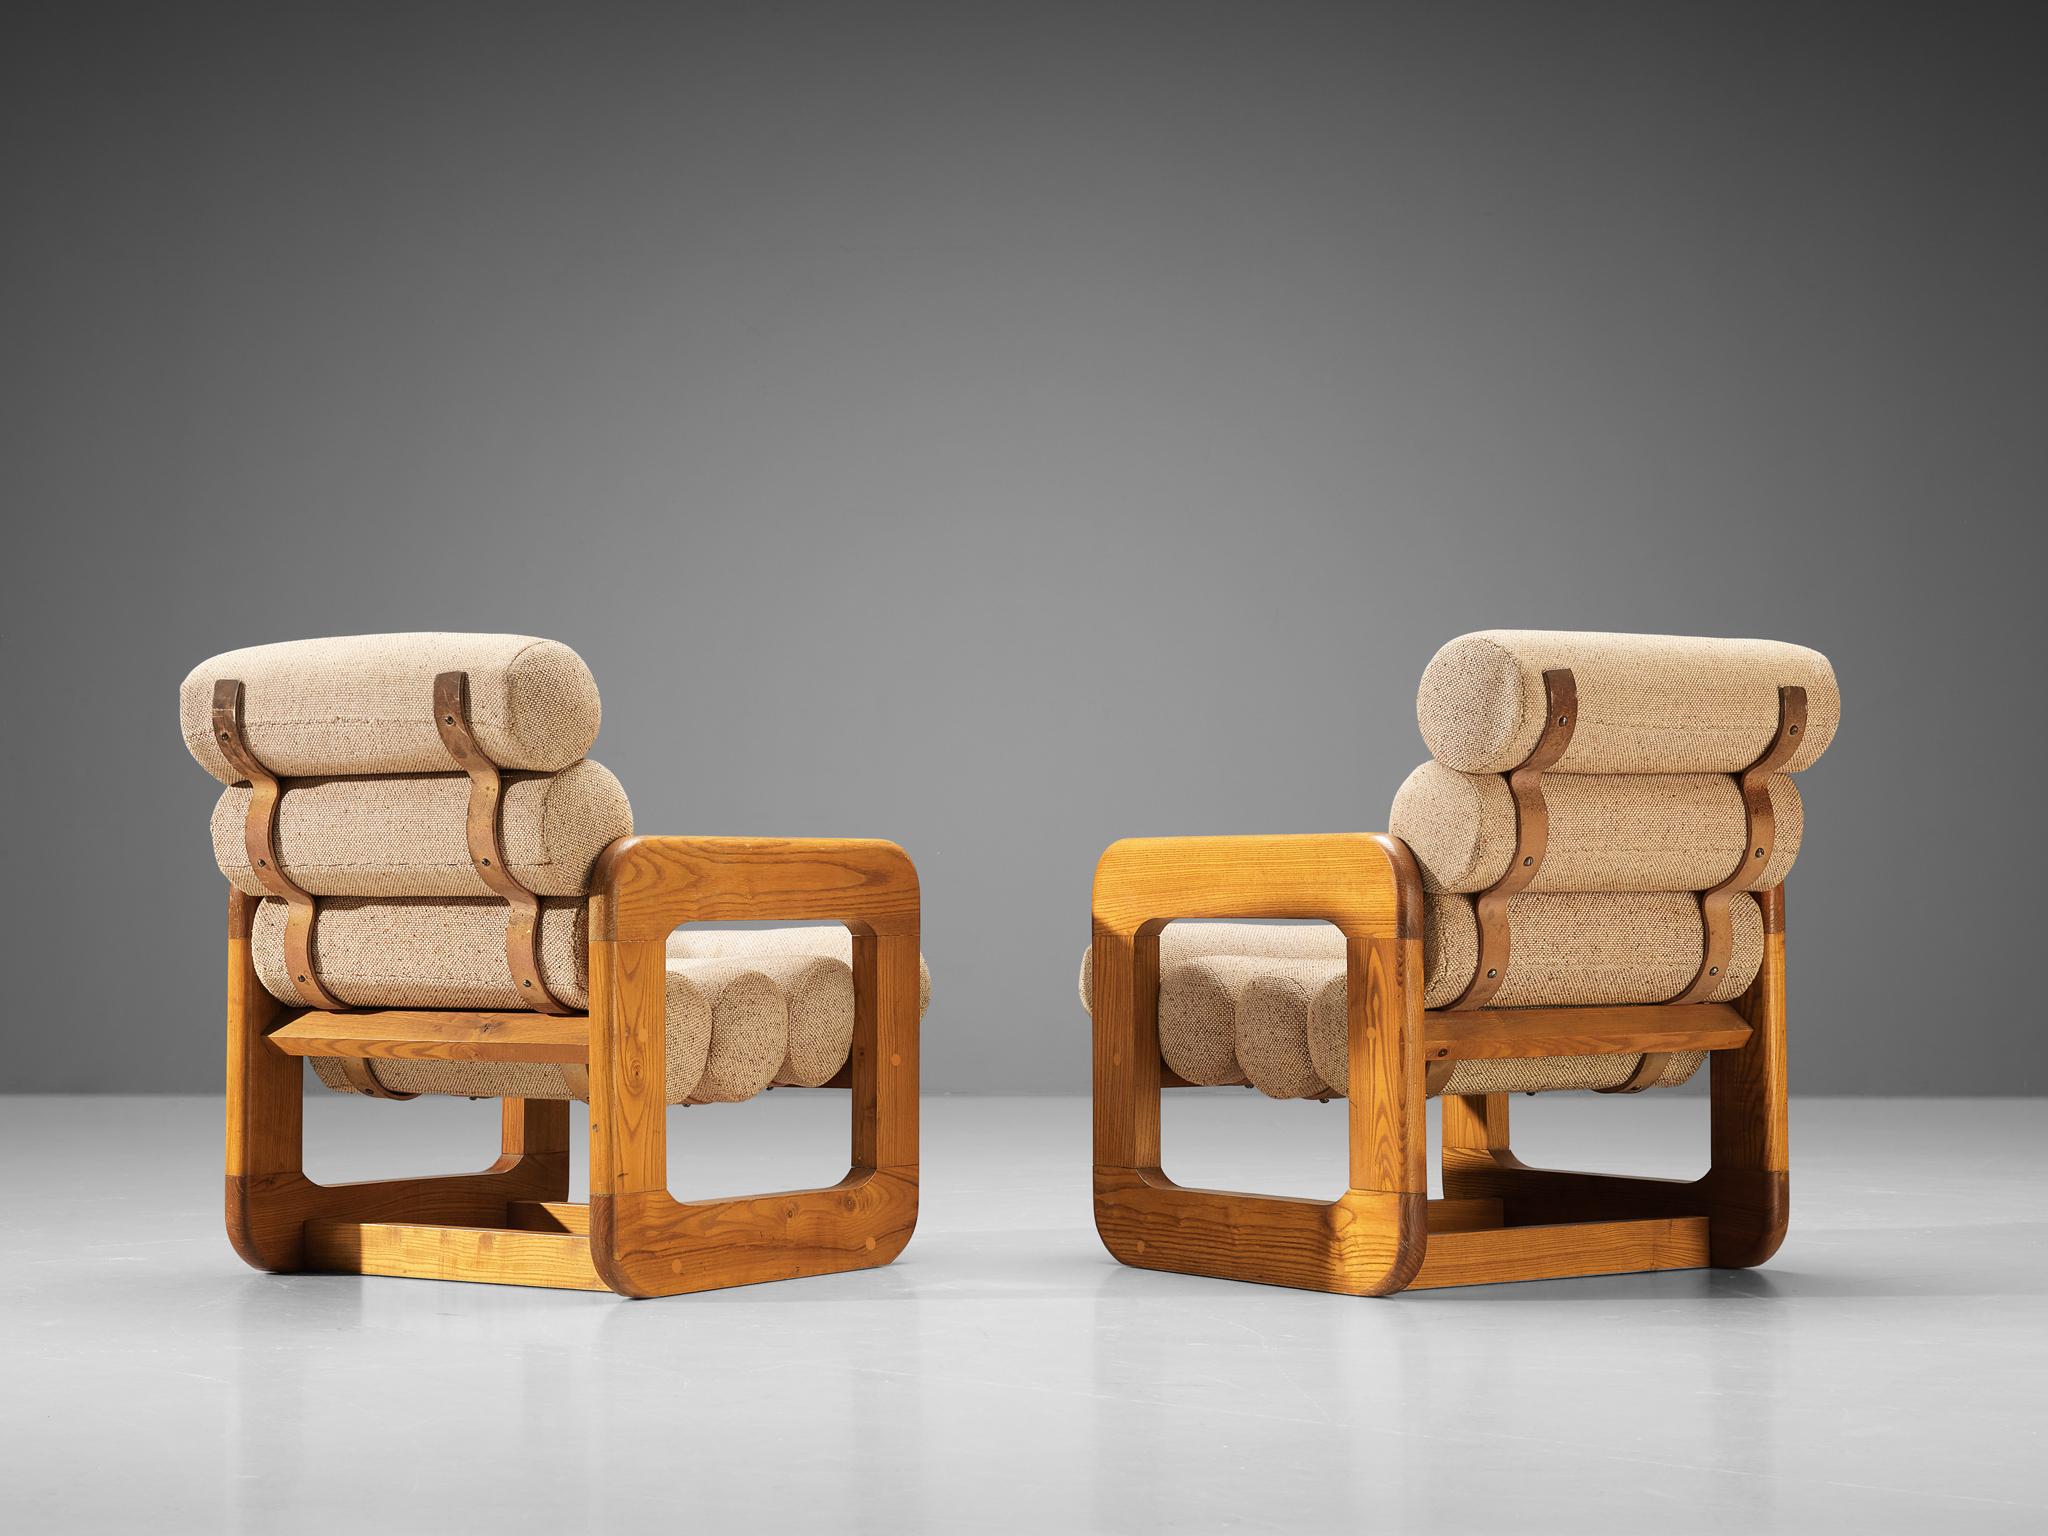 Lounge chairs, ash, fabric, Europe, 1970s. 

Pair of two unconventional lounge chairs that feature an outstanding design. The seating contains multiple tube-shaped cushions attached together to create a seat and backrest. The repetition of the